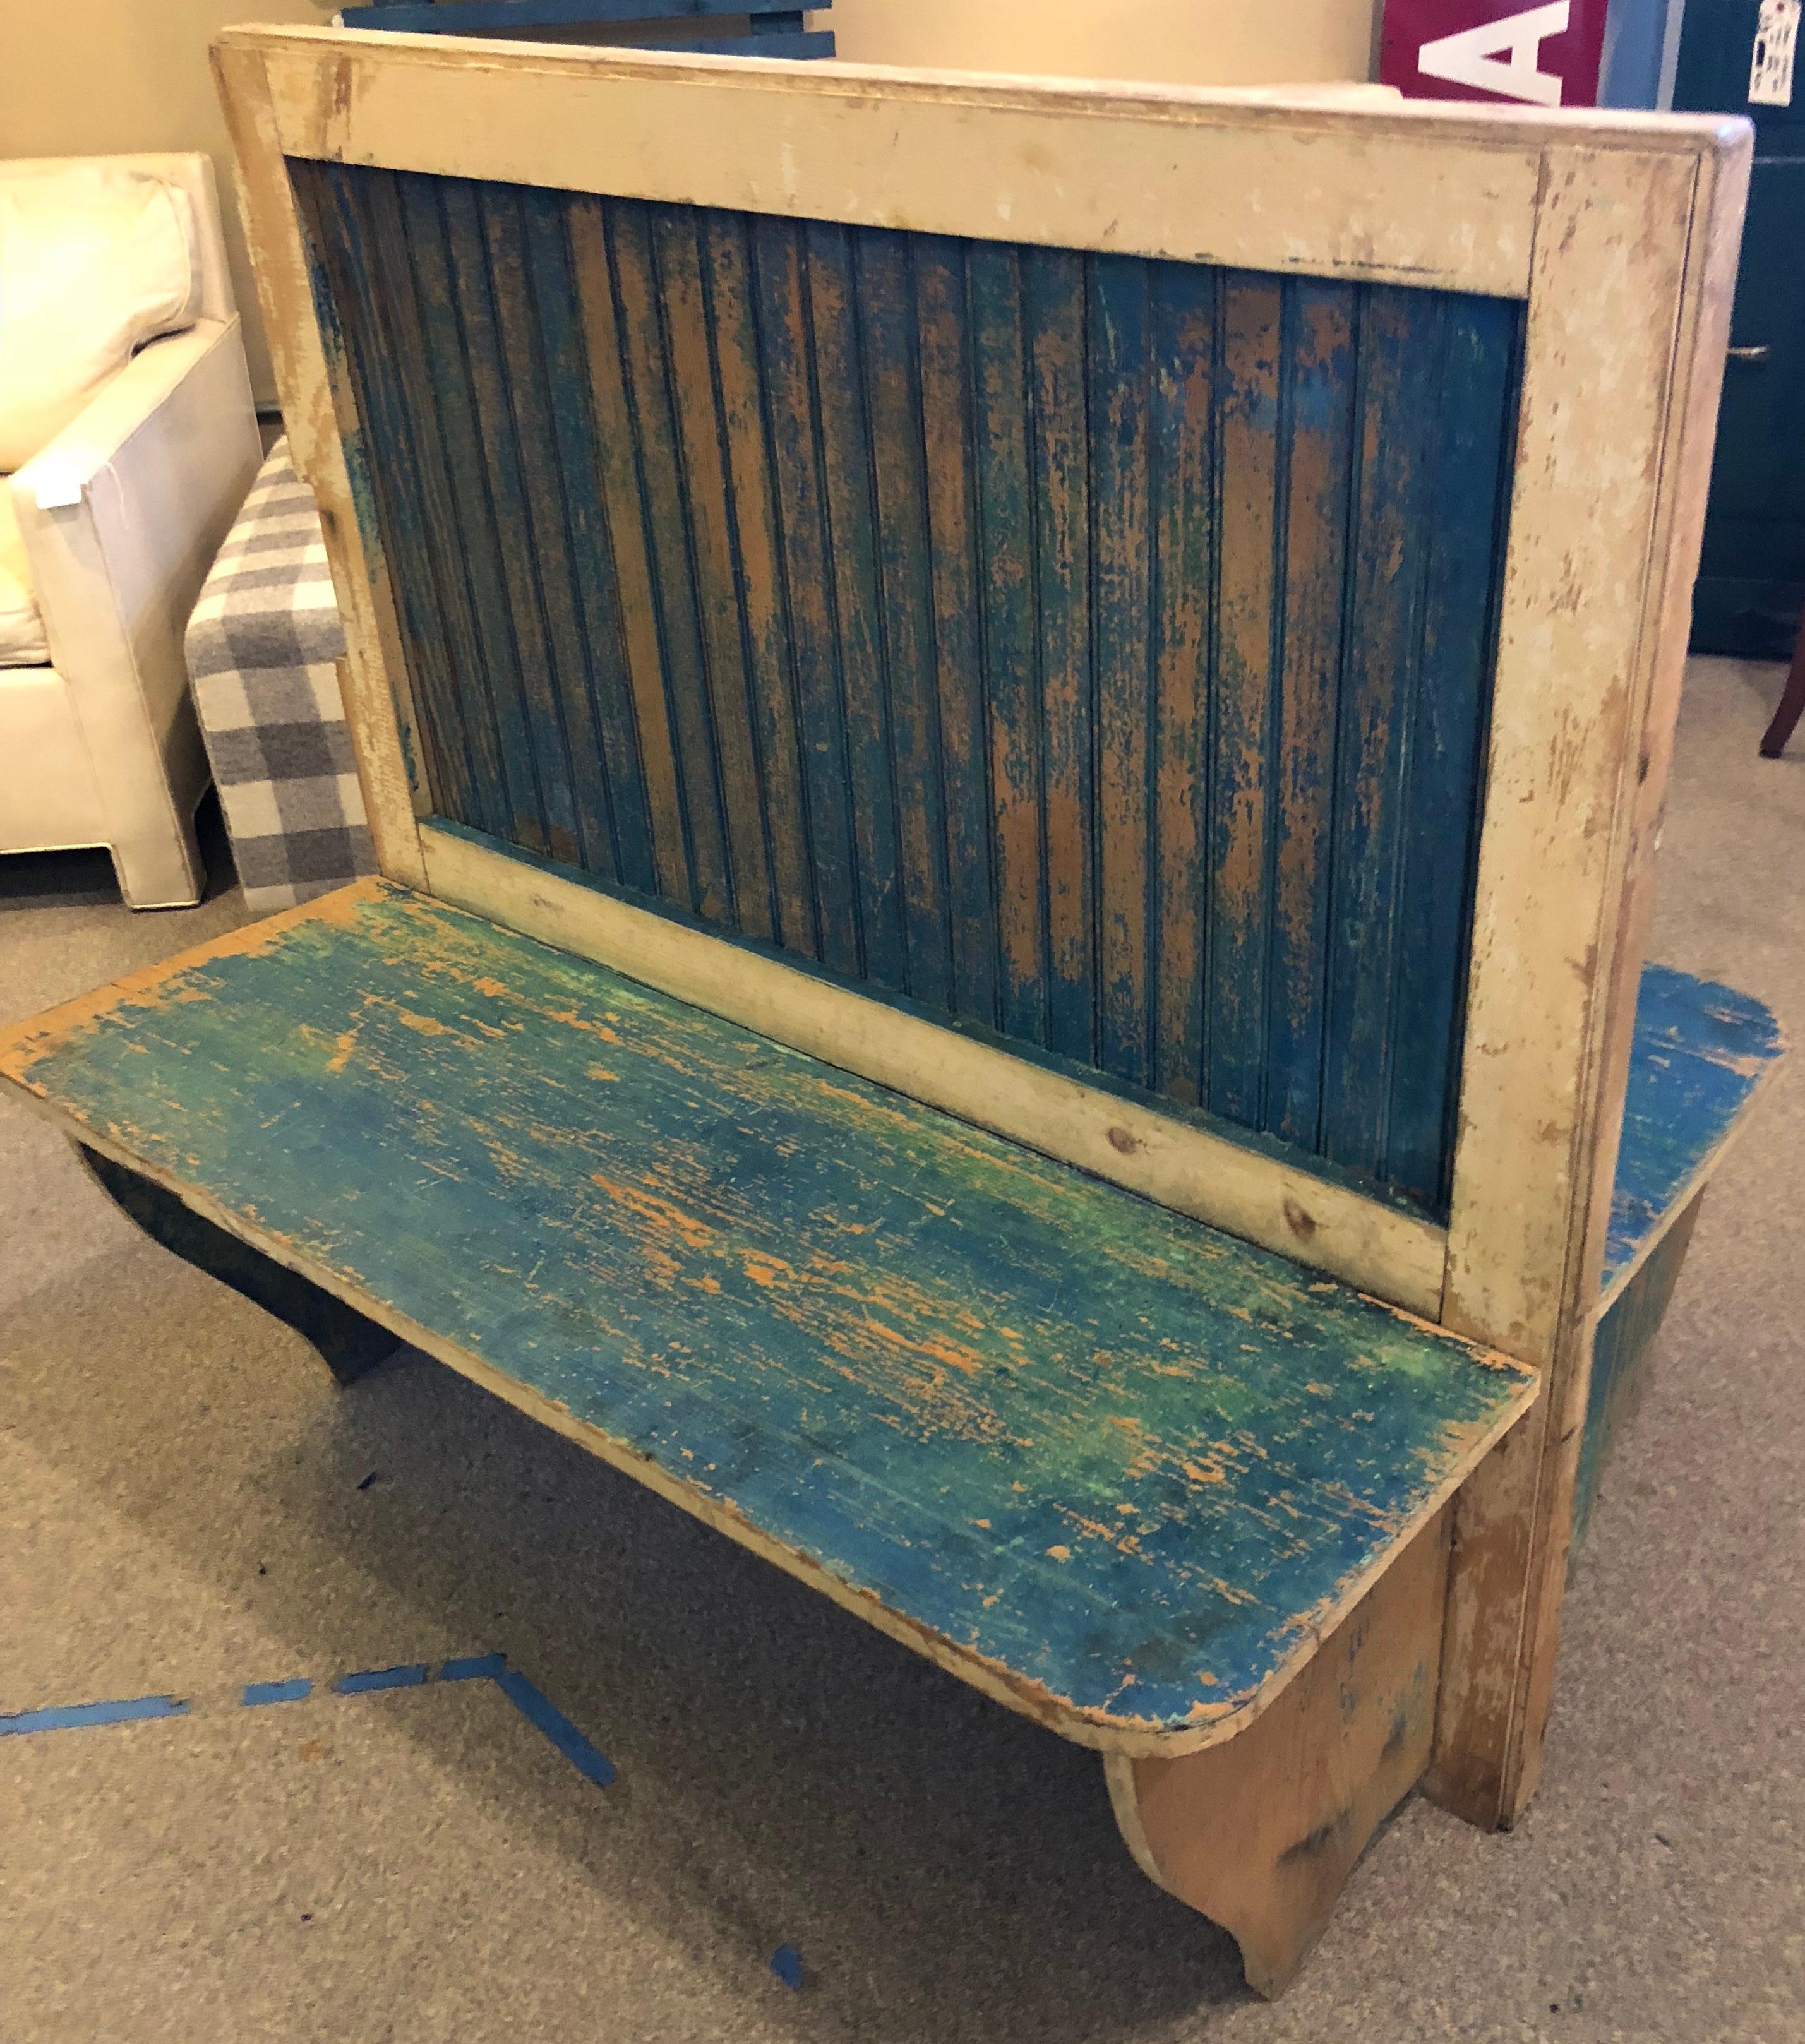 Bench from Train Depot, circa 1900s, 2 Sided with Original Blue Paint (Primitiv)